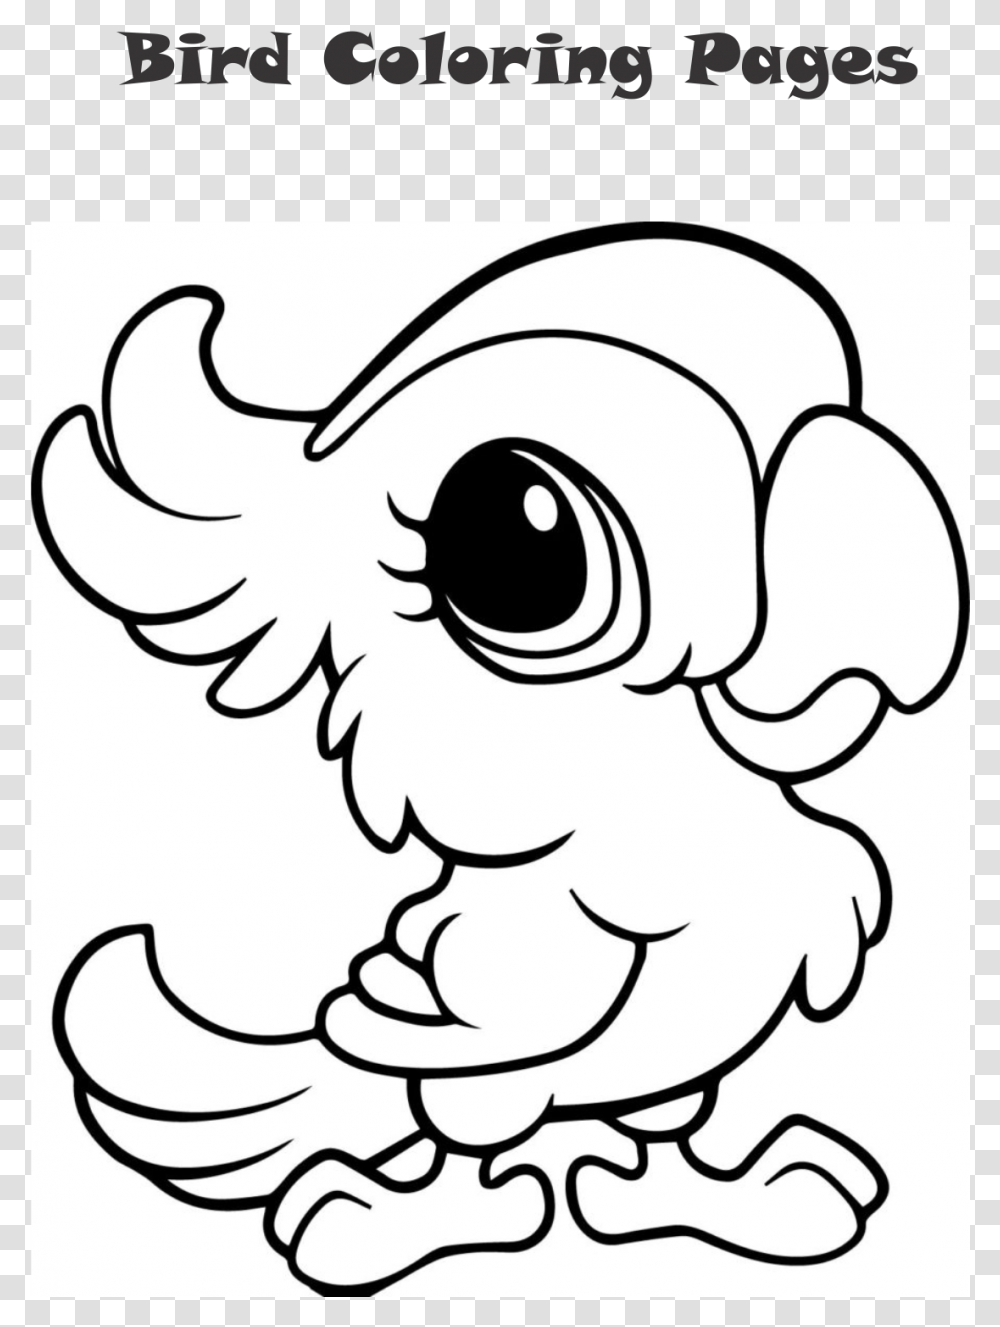 Bird Coloring Pages Cute Bird Coloring Pages, Drawing, Animal, Stencil Transparent Png